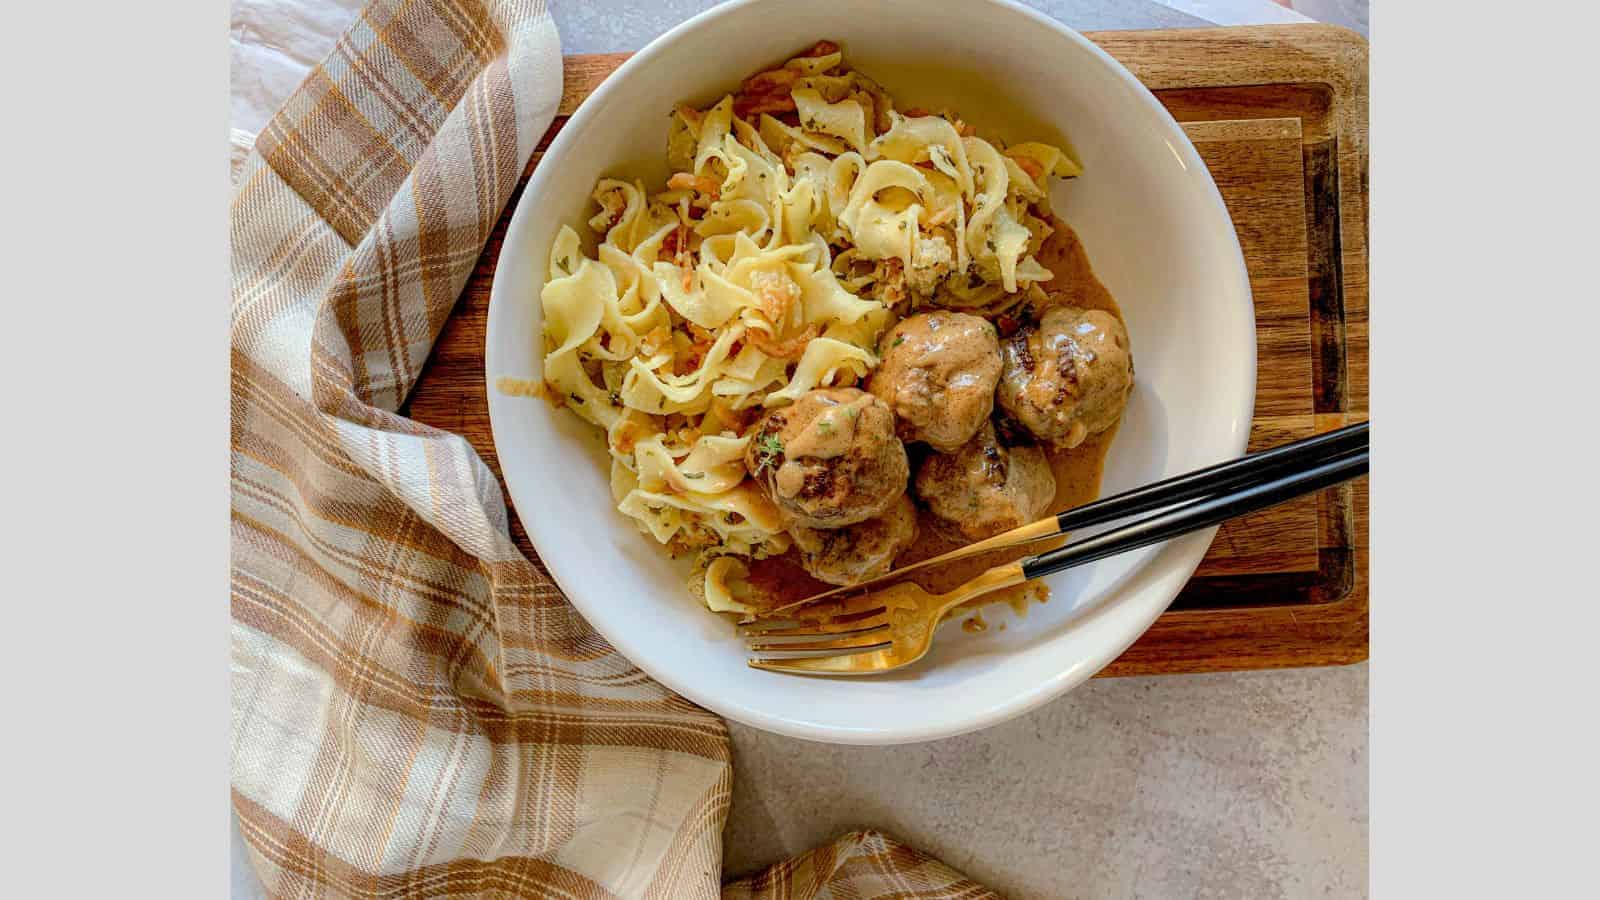 A bowl filled with French onion noodle casserole and a side of meatballs.